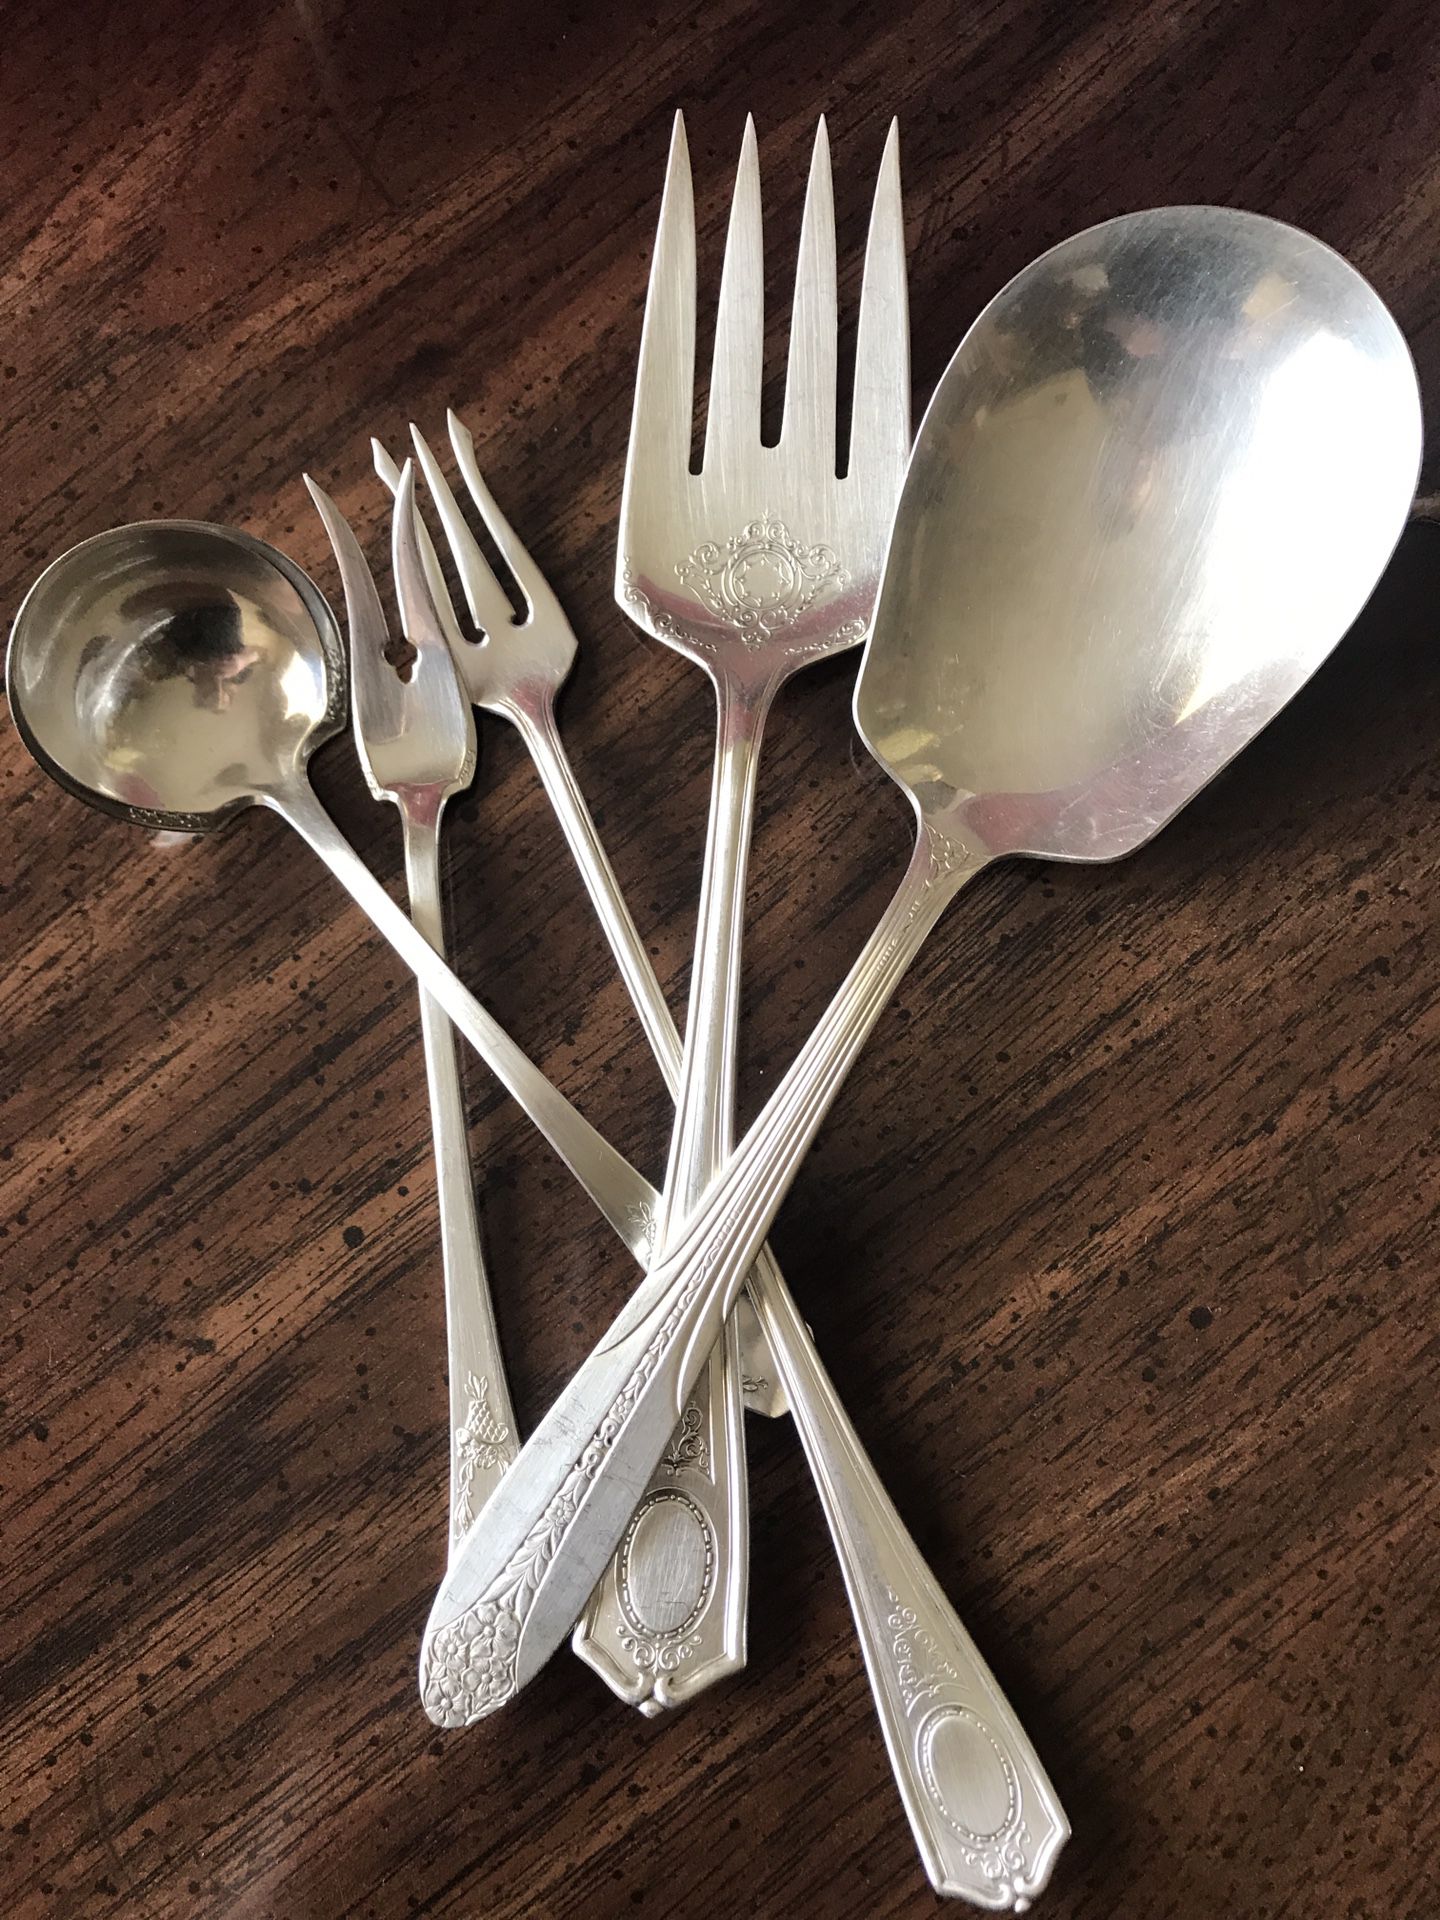 Silverware/flatware ..Assorted vintage silver plated serving pieces